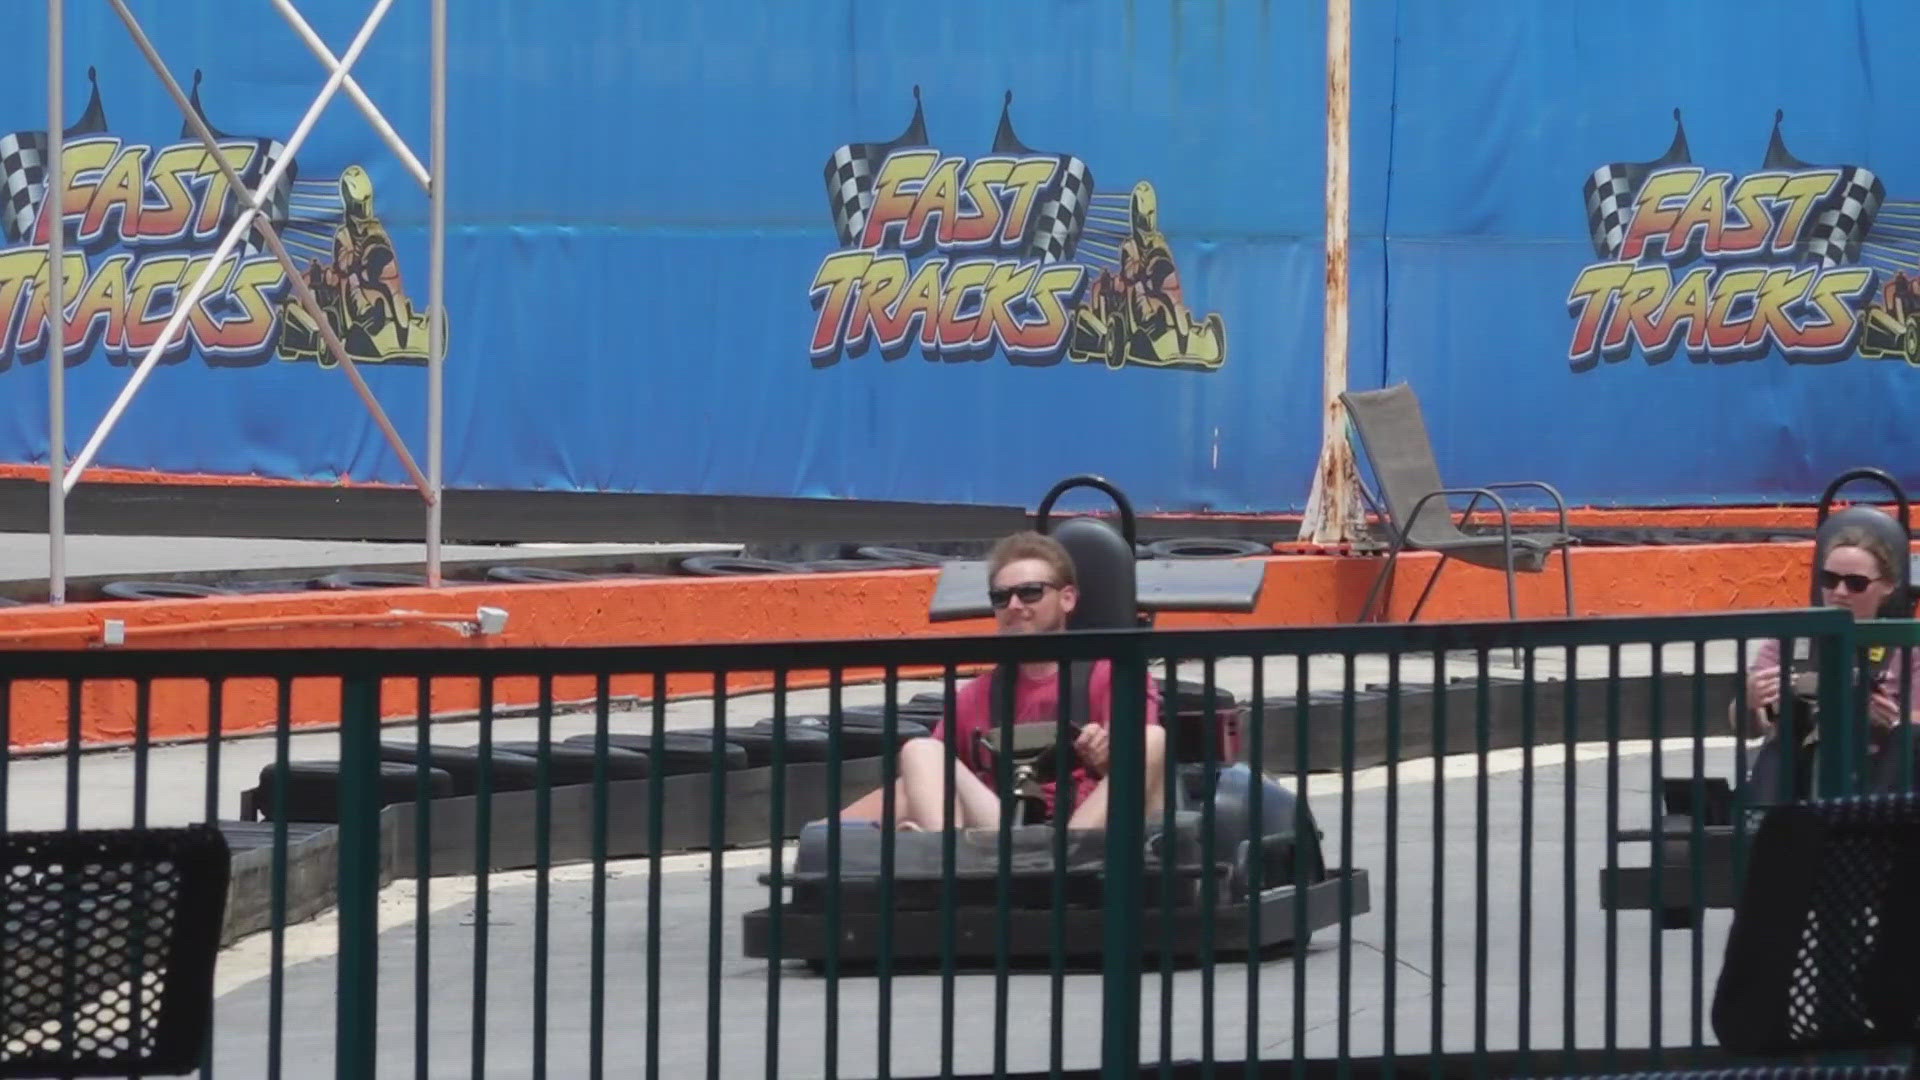 The Pigeon Forge Fire Department said several other people were treated after an "isolated incident" at the Pigeon Forge go-kart track on Thursday.